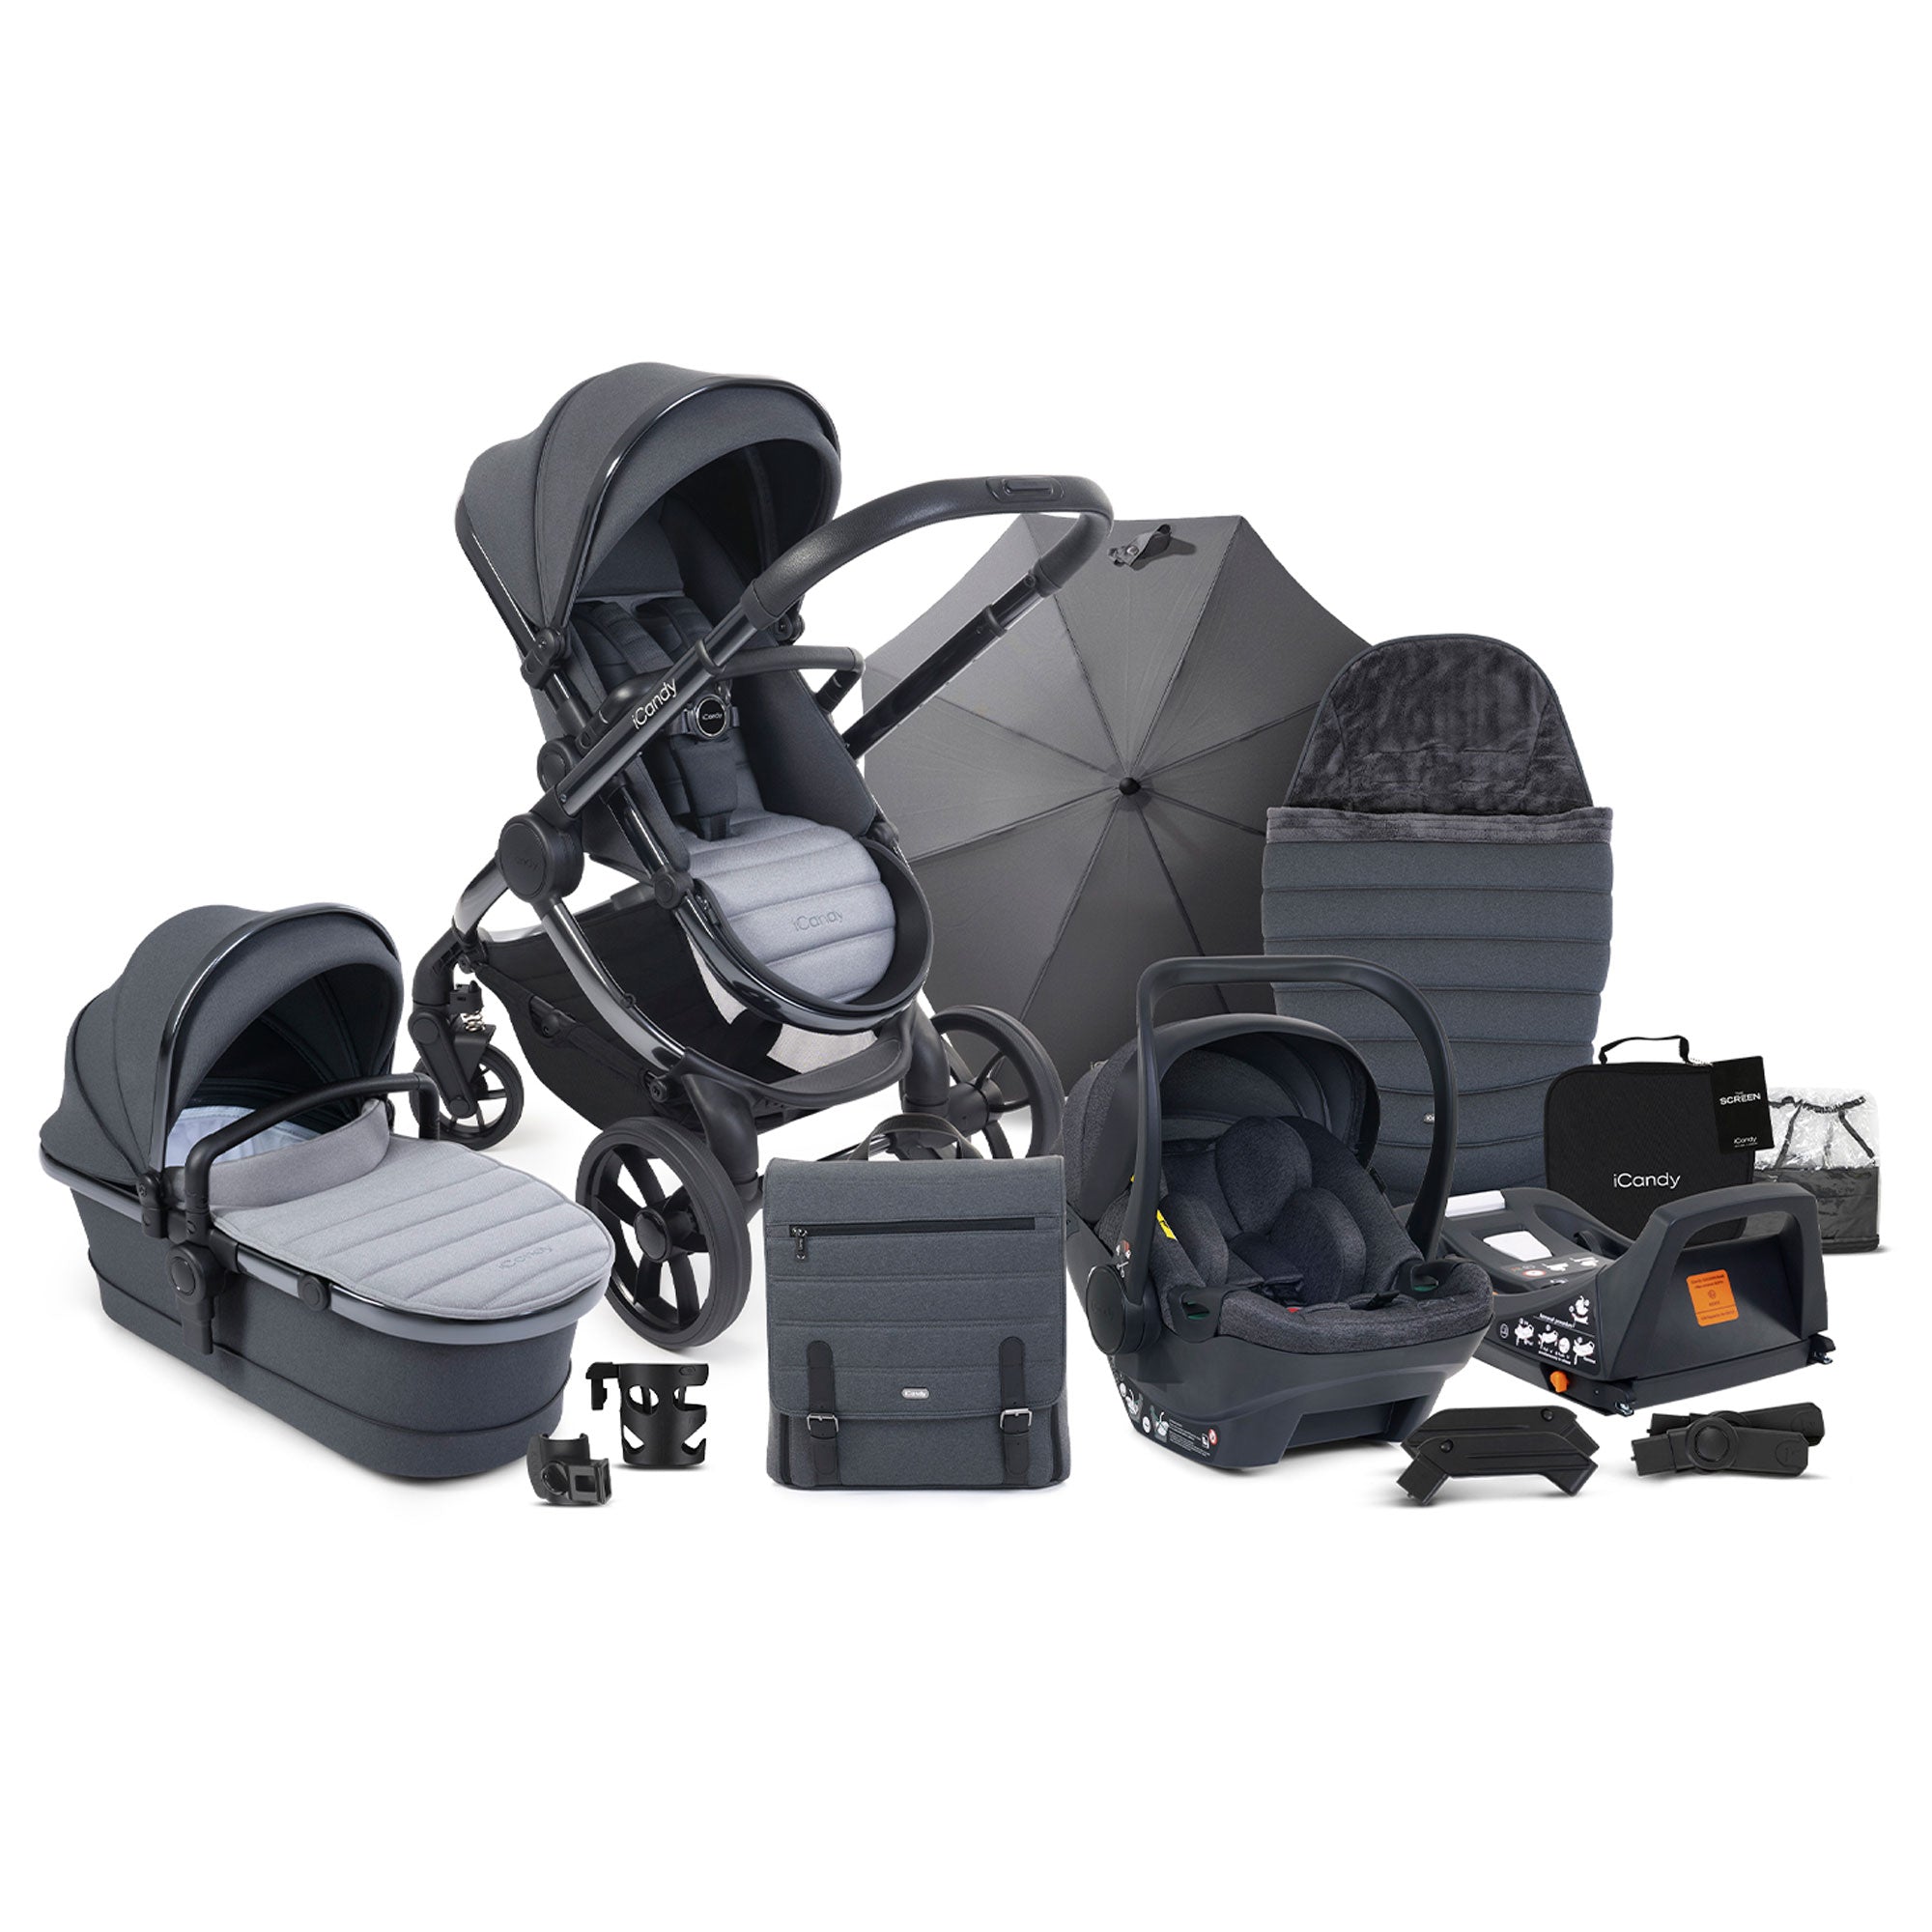 iCandy Peach 7 Complete Bundle with COCOON Car Seat in Truffle